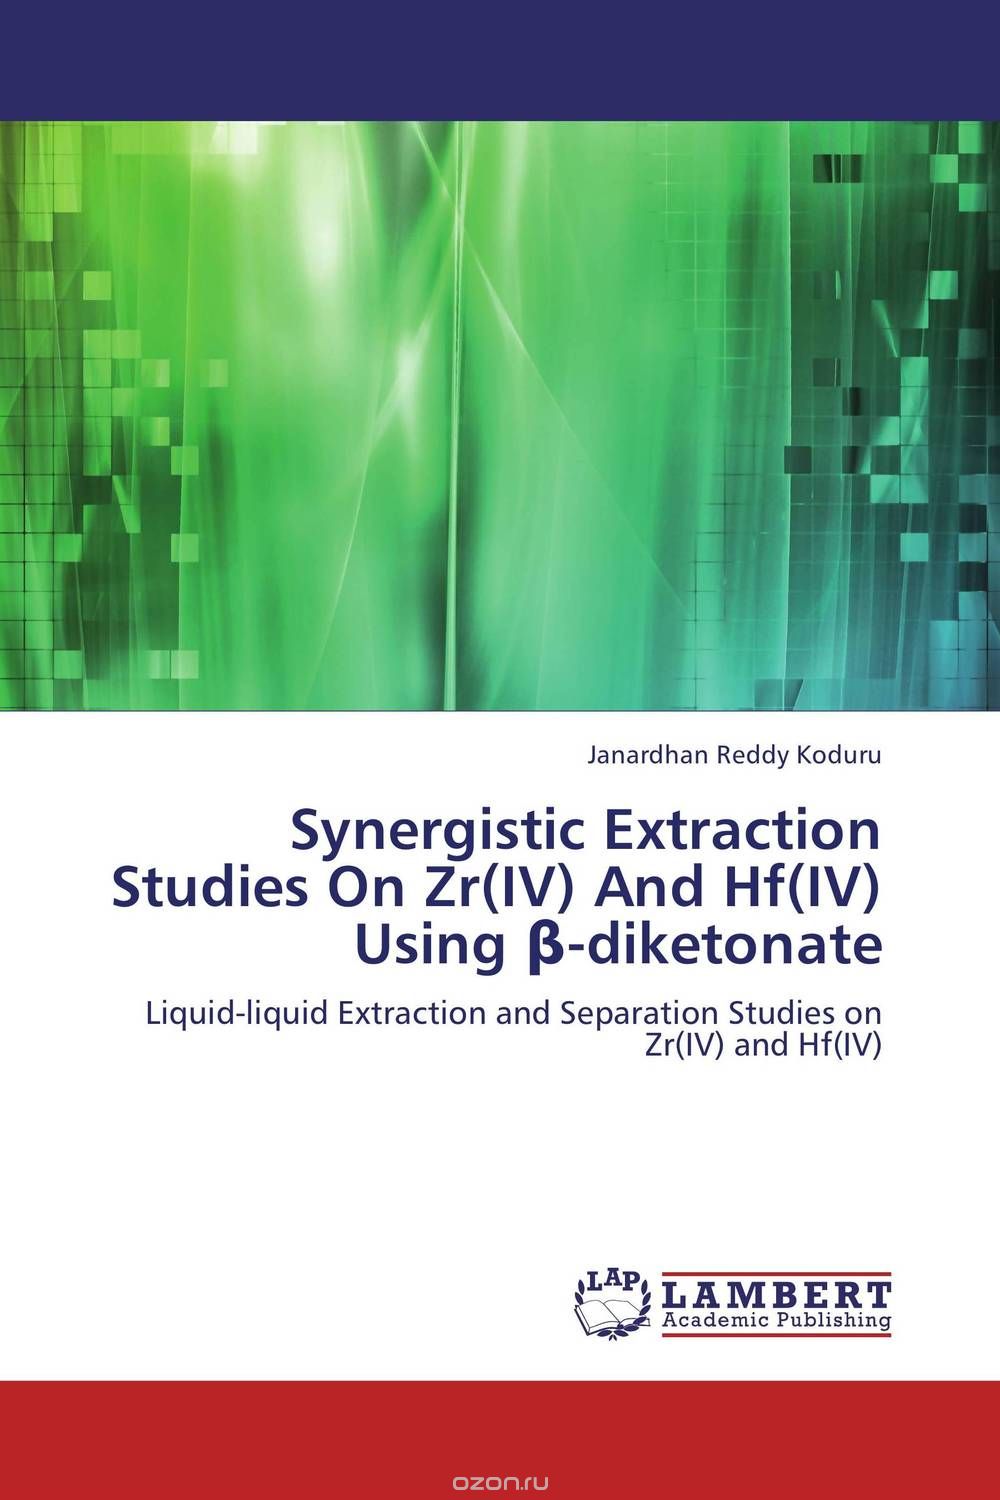 Synergistic Extraction Studies On Zr(IV) And Hf(IV) Using ?-diketonate